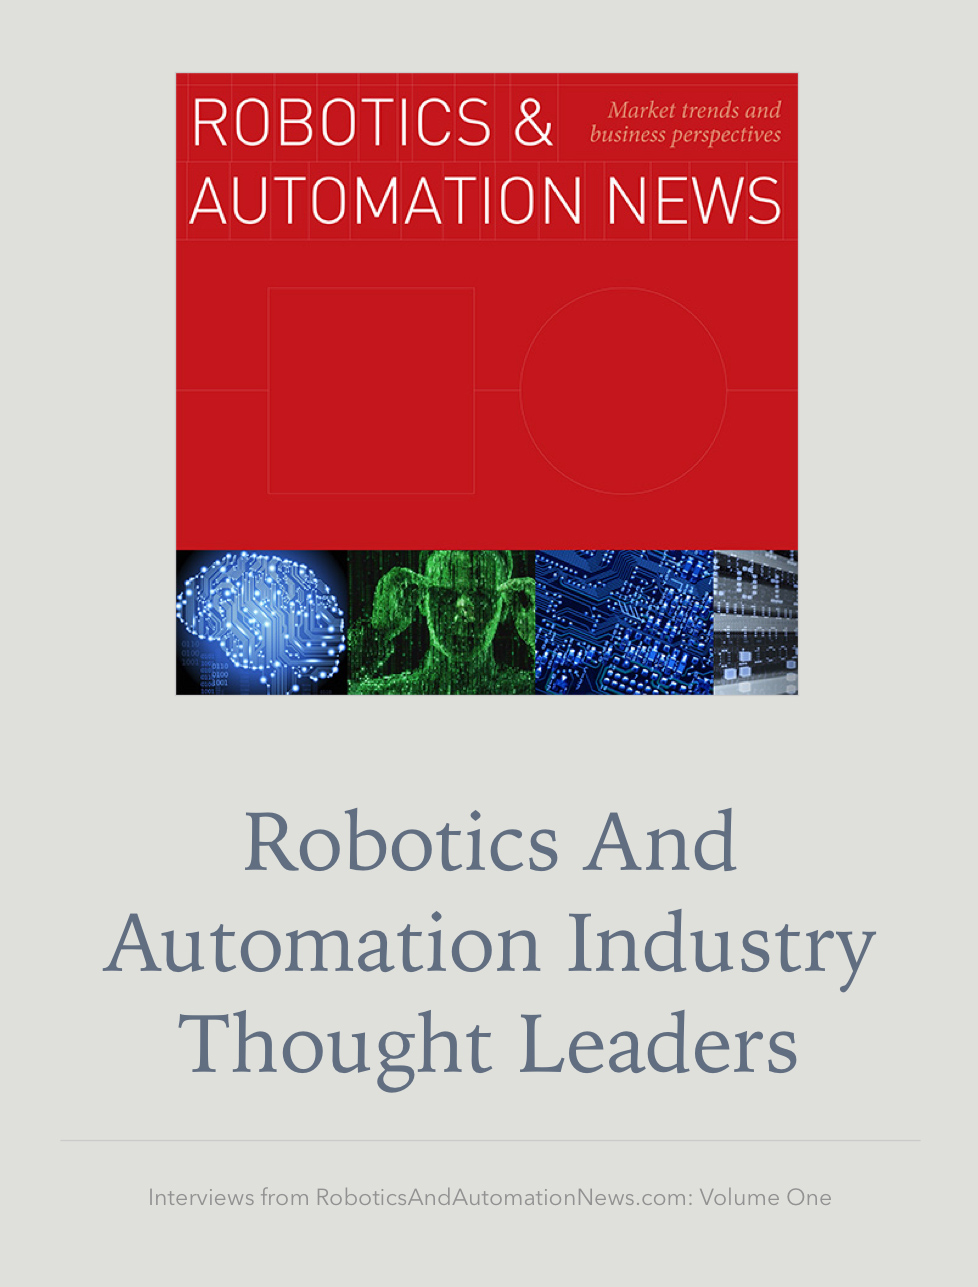 New book launch: Robotics and Automation Industry Thought Leaders